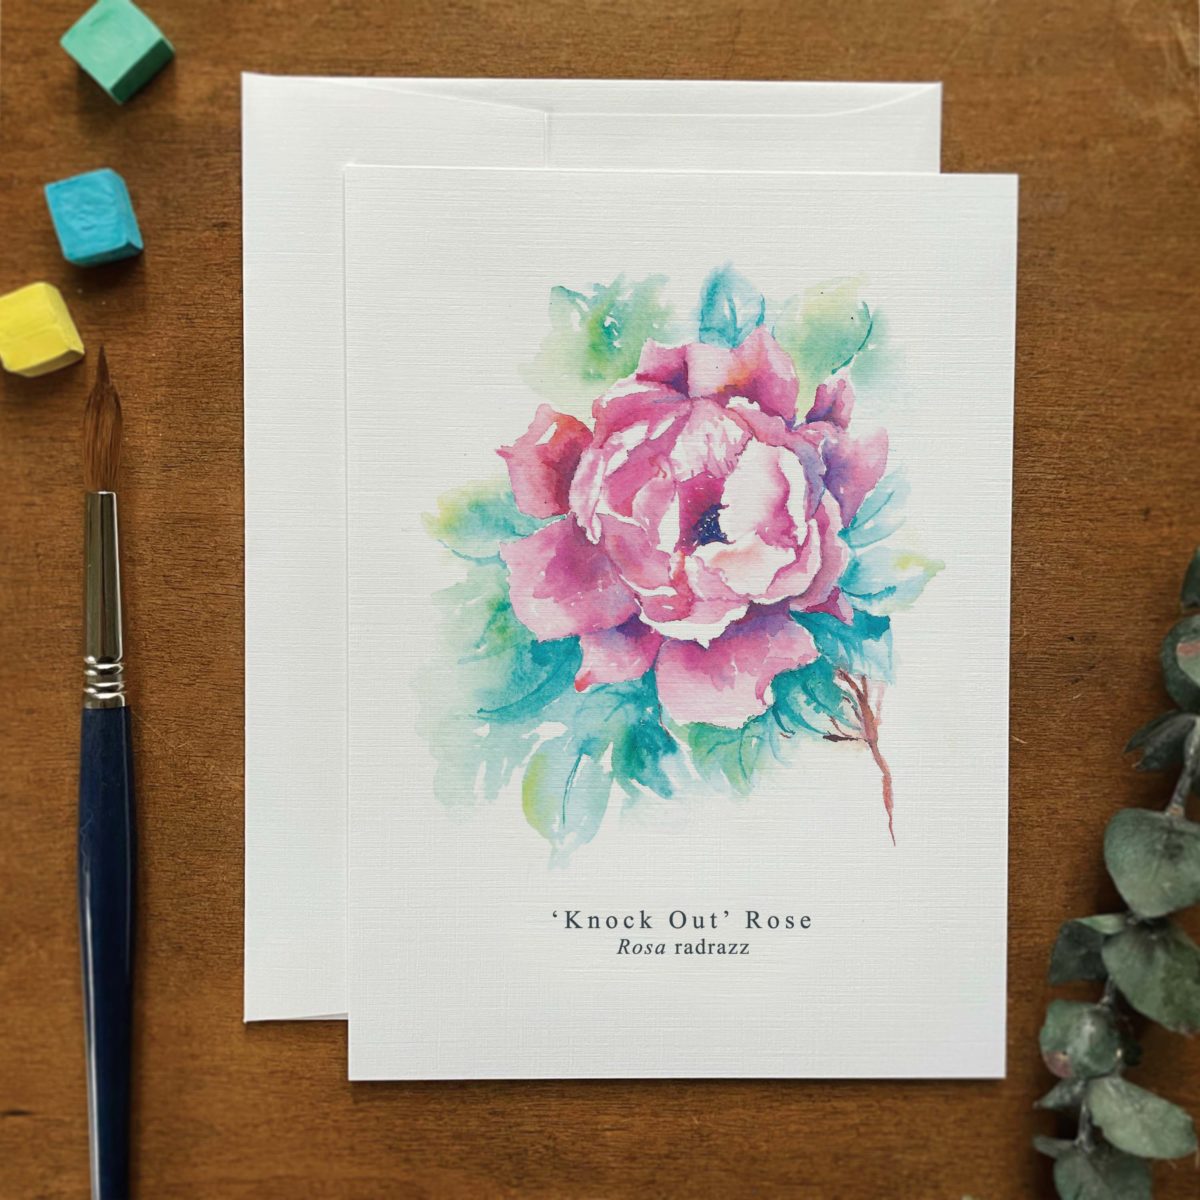 A2 greeting card of Knock Out Rose